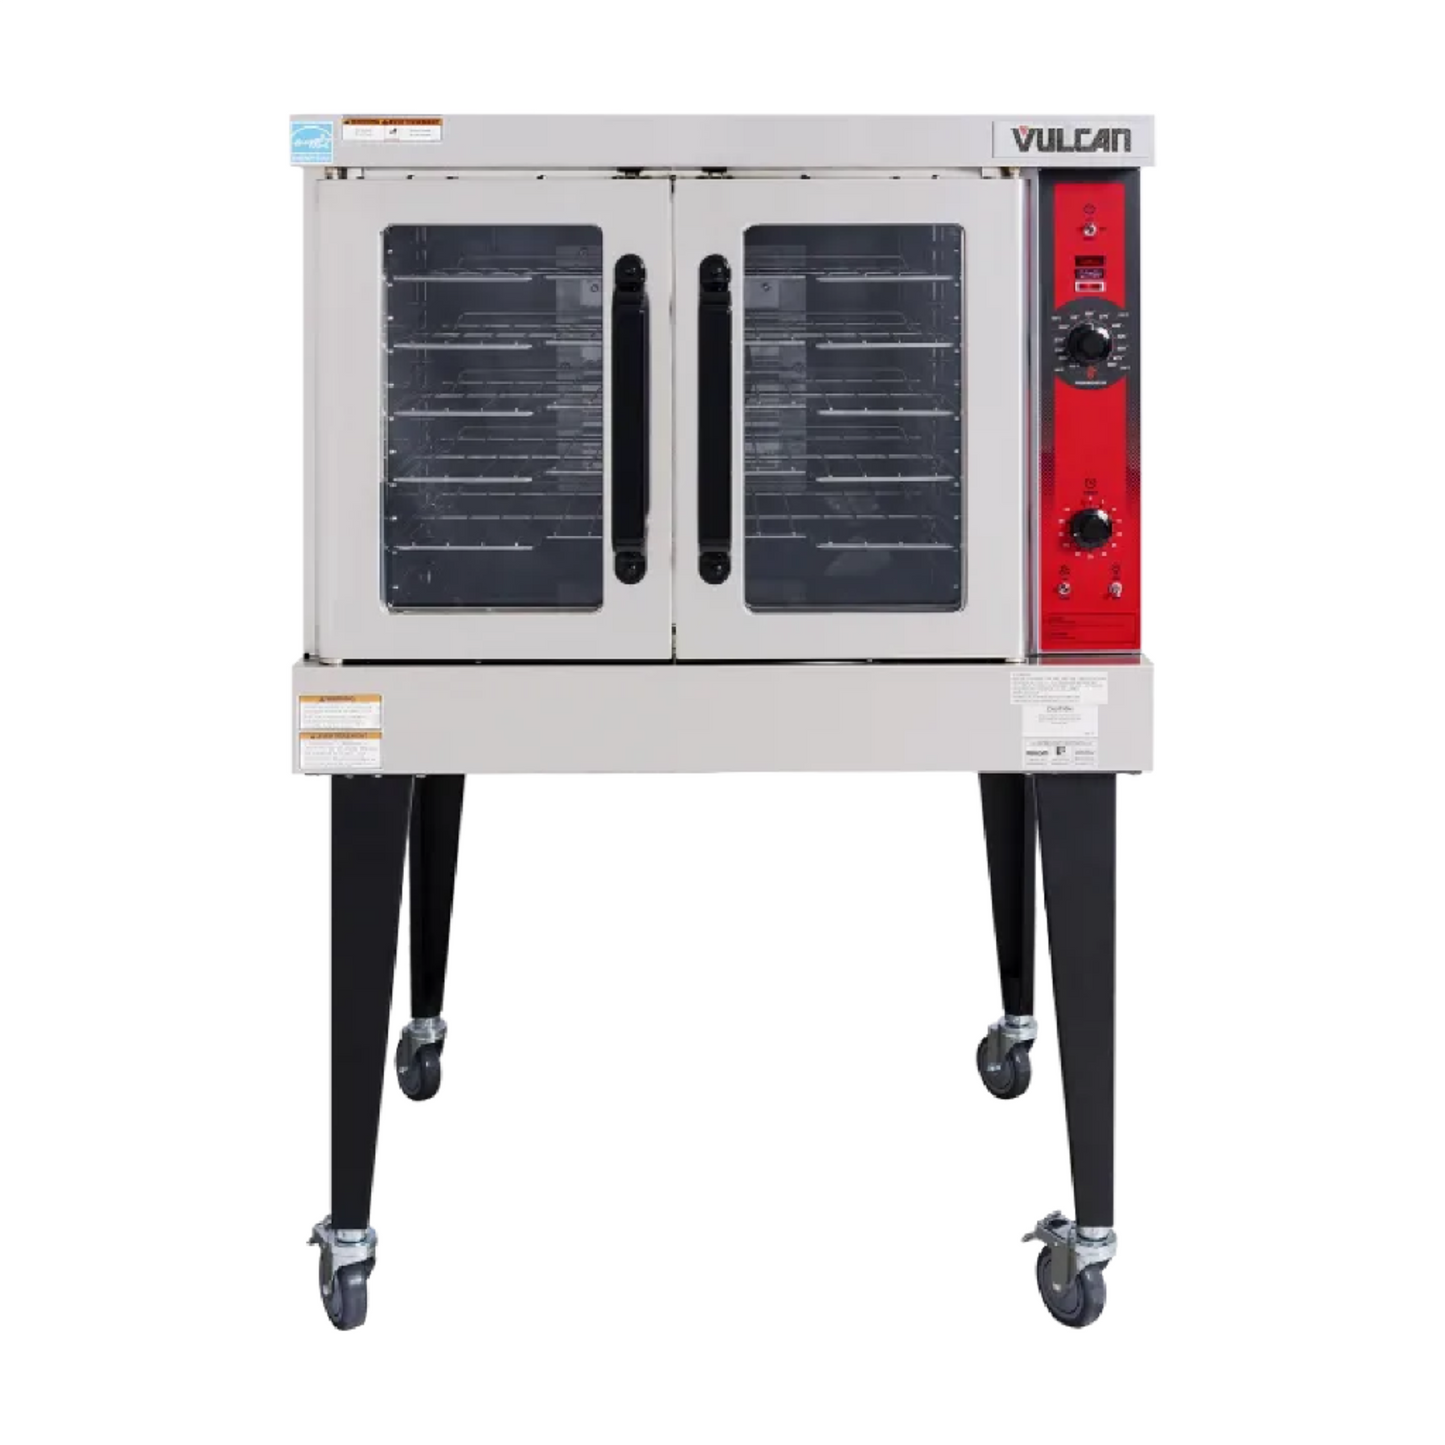 VULCAN COMMERCIAL CONVECTION OVEN SINGLE DECK 42 1/4'' DEPTH GAS w/SOLID STATE CONTROLS